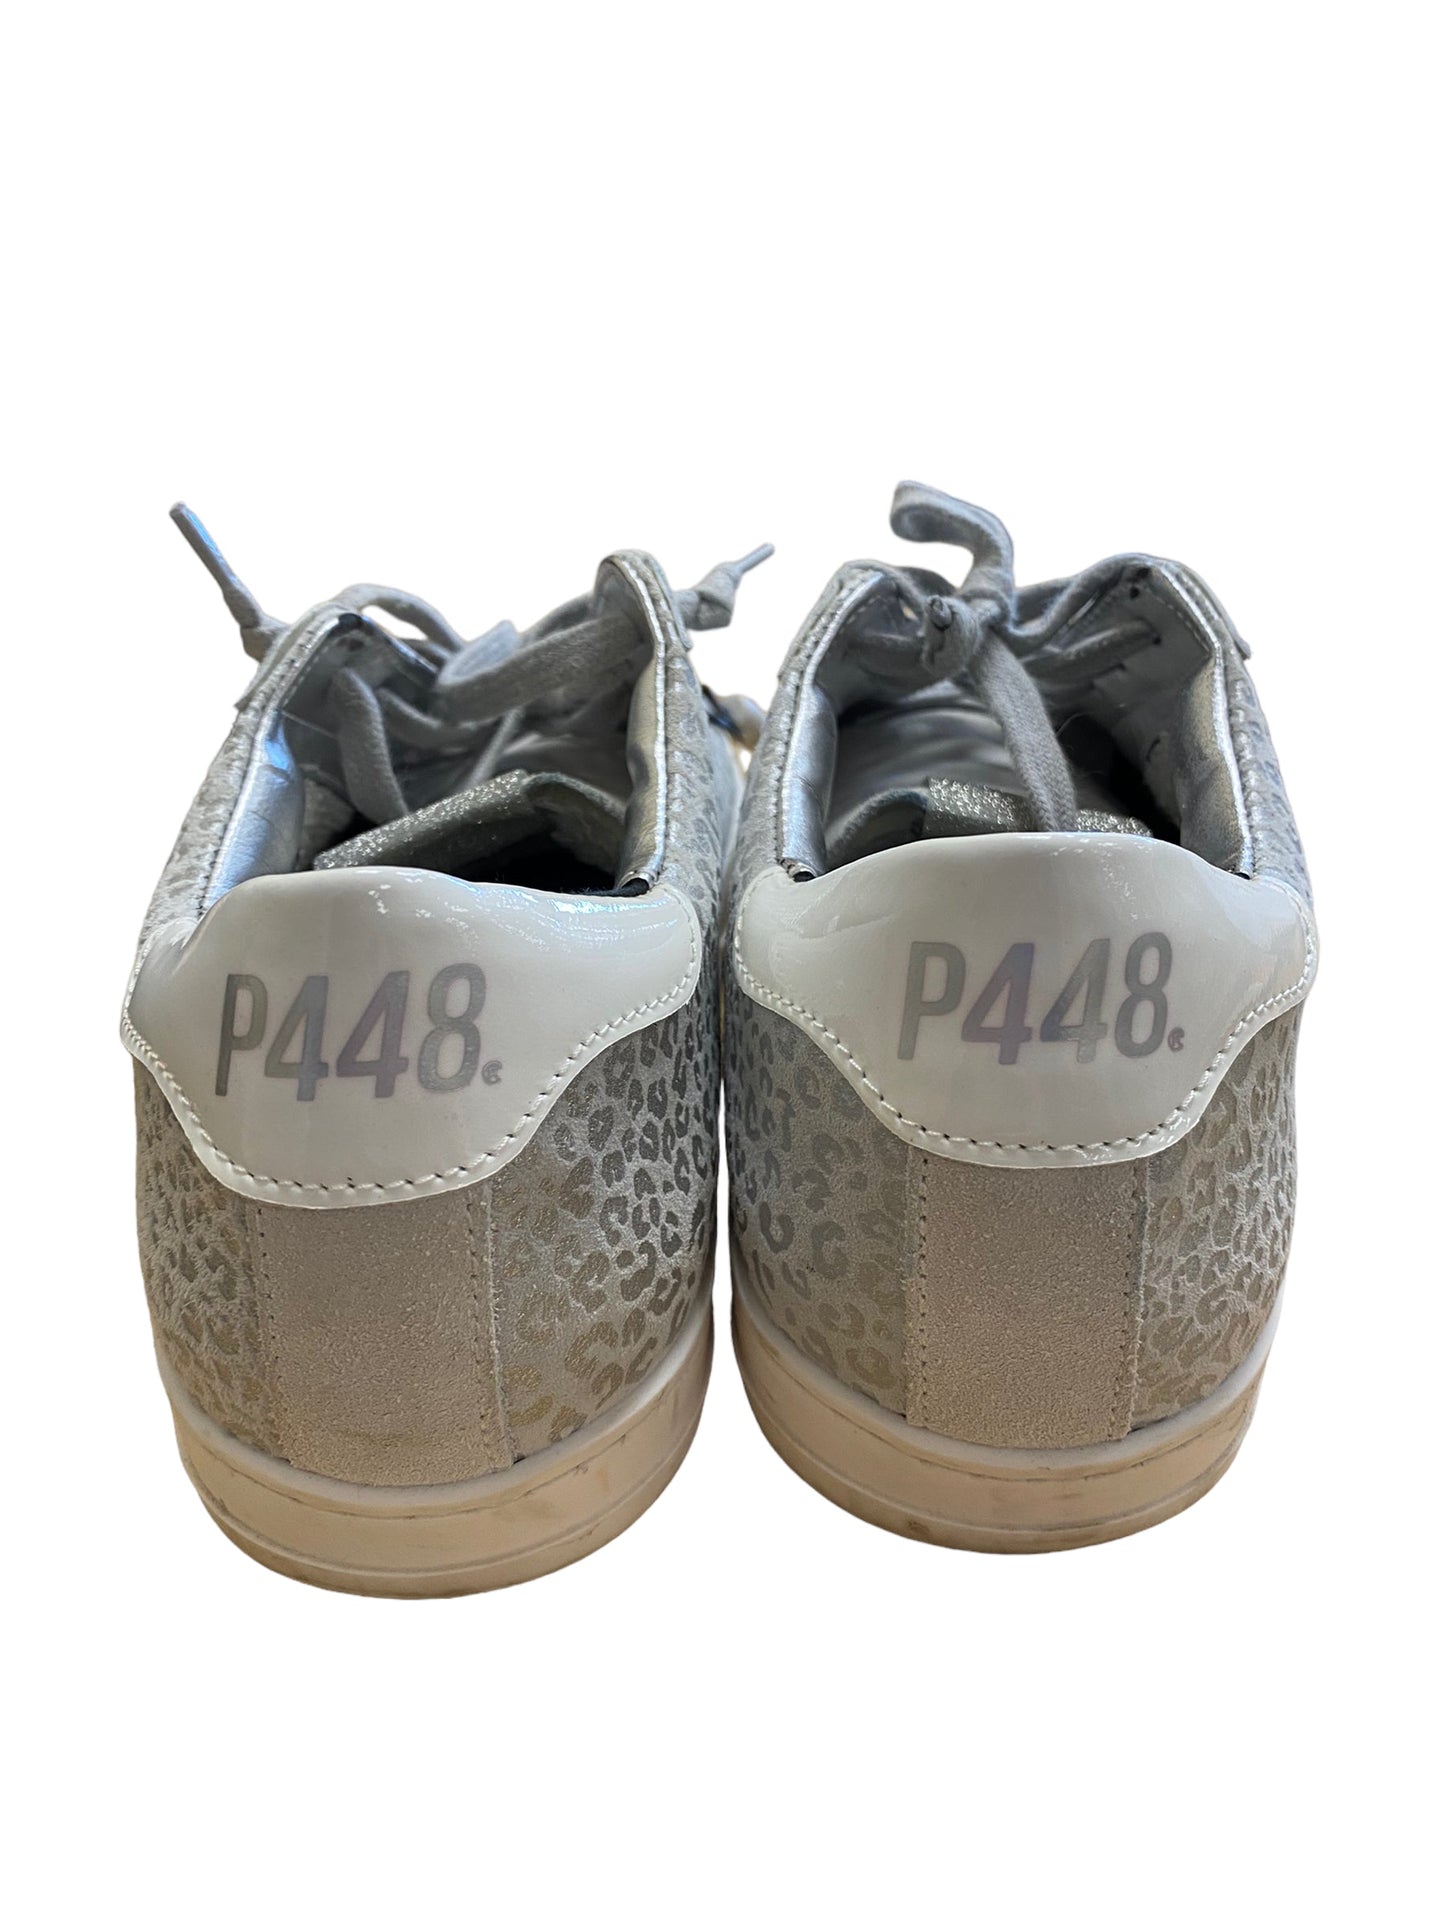 Shoes Sneakers By P448